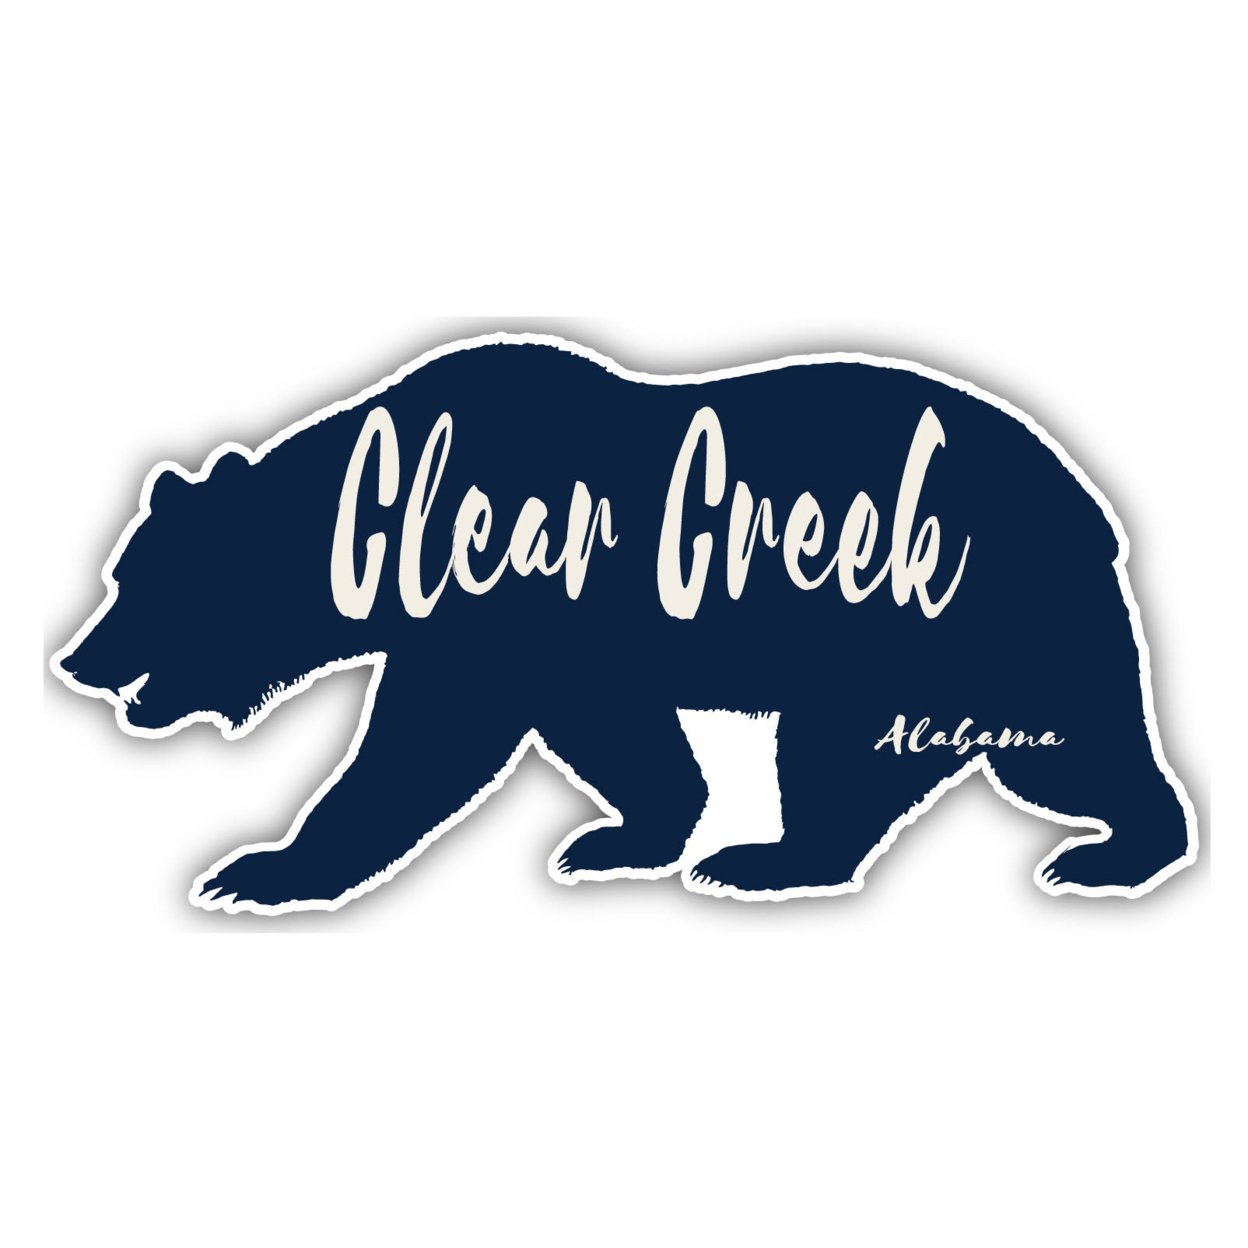 Clear Creek Alabama Souvenir Decorative Stickers (Choose Theme And Size) - 4-Pack, 8-Inch, Tent